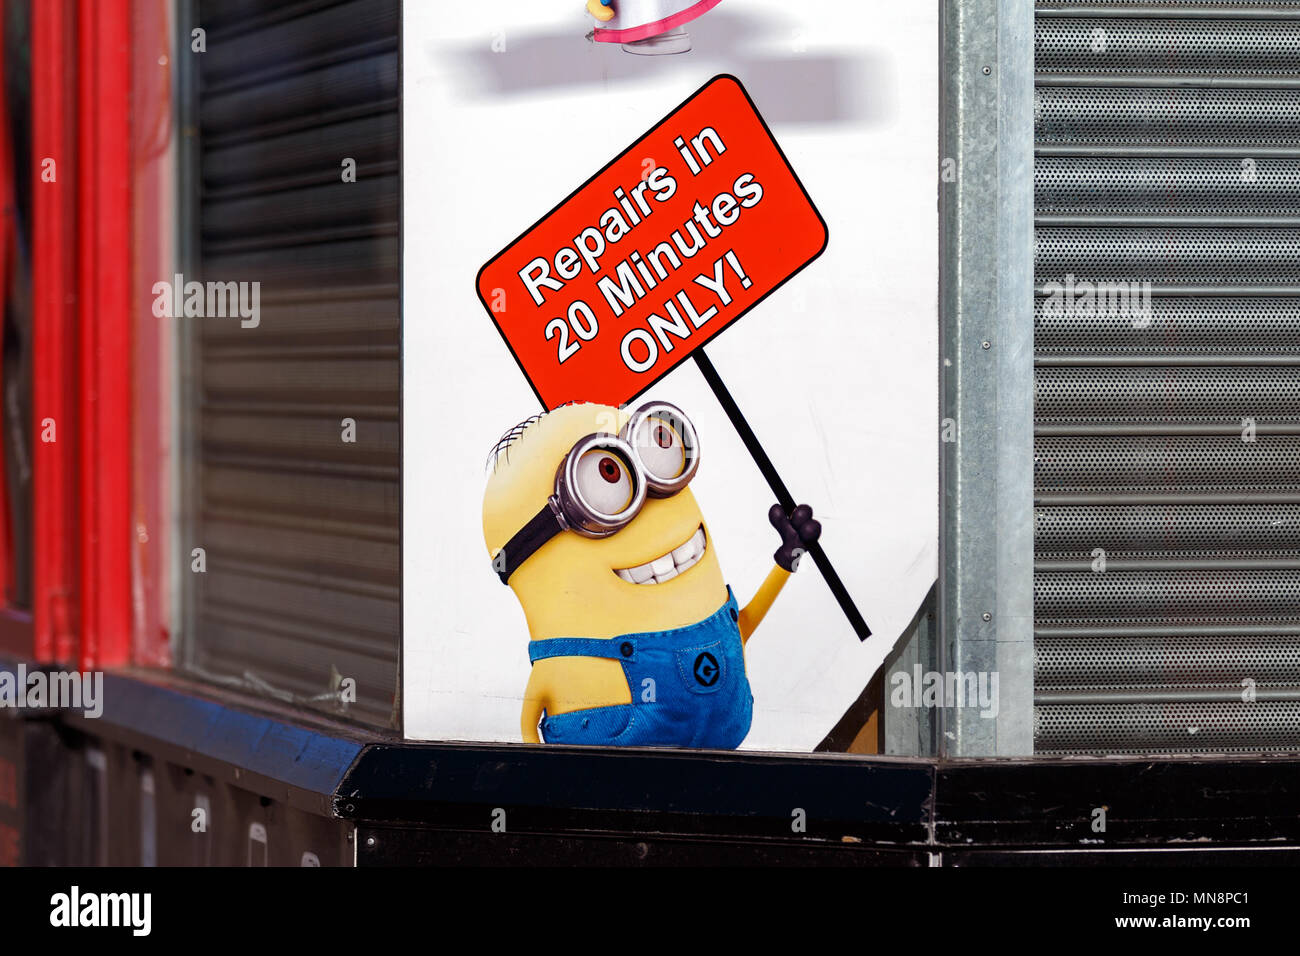 A minion, from the movie franchise Despicable Me and later Minions, being used to advertise a closed phone repair shop. Stock Photo